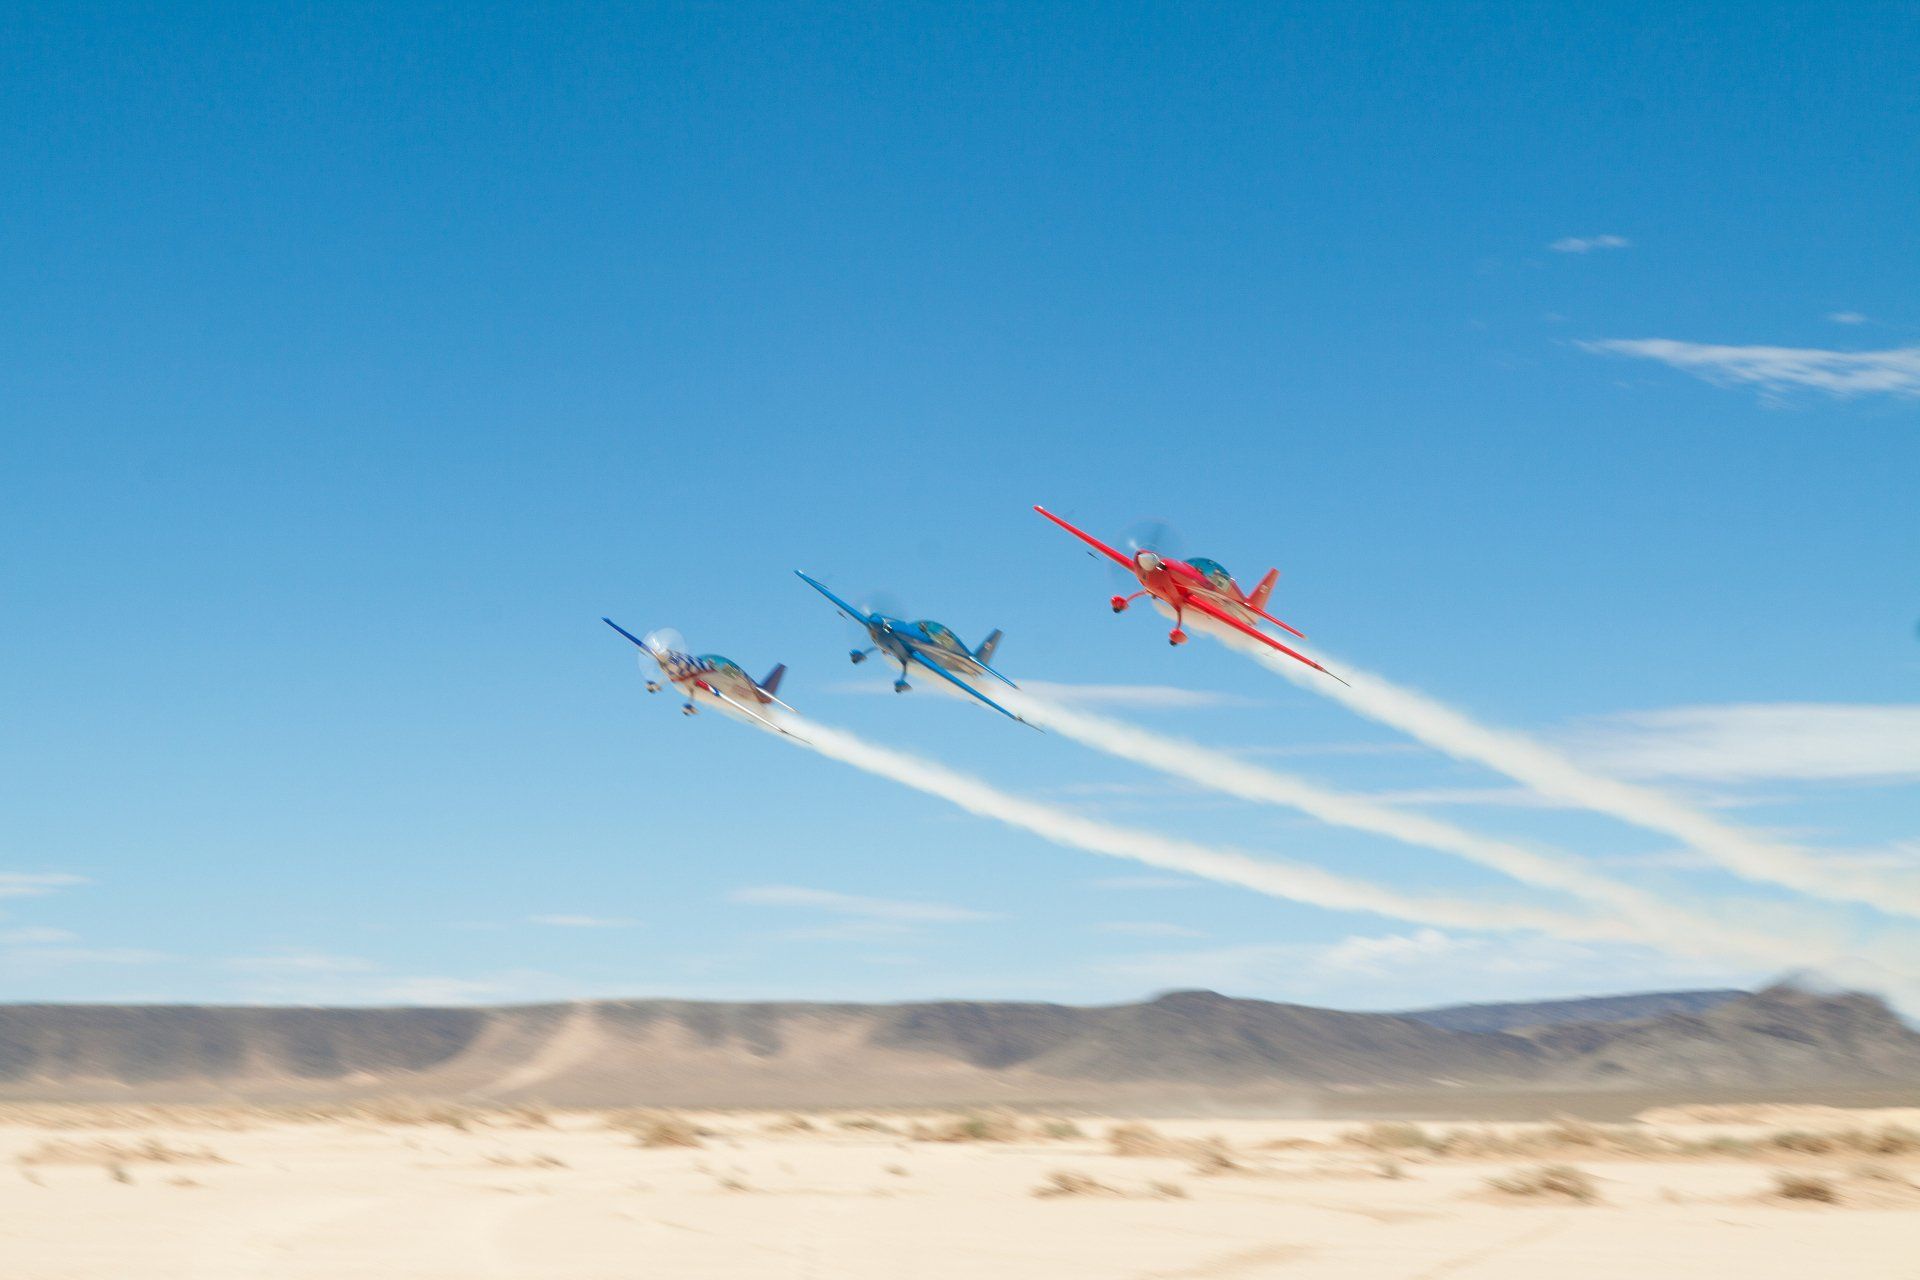 a group of 3 stunt airplanes flying in the sky